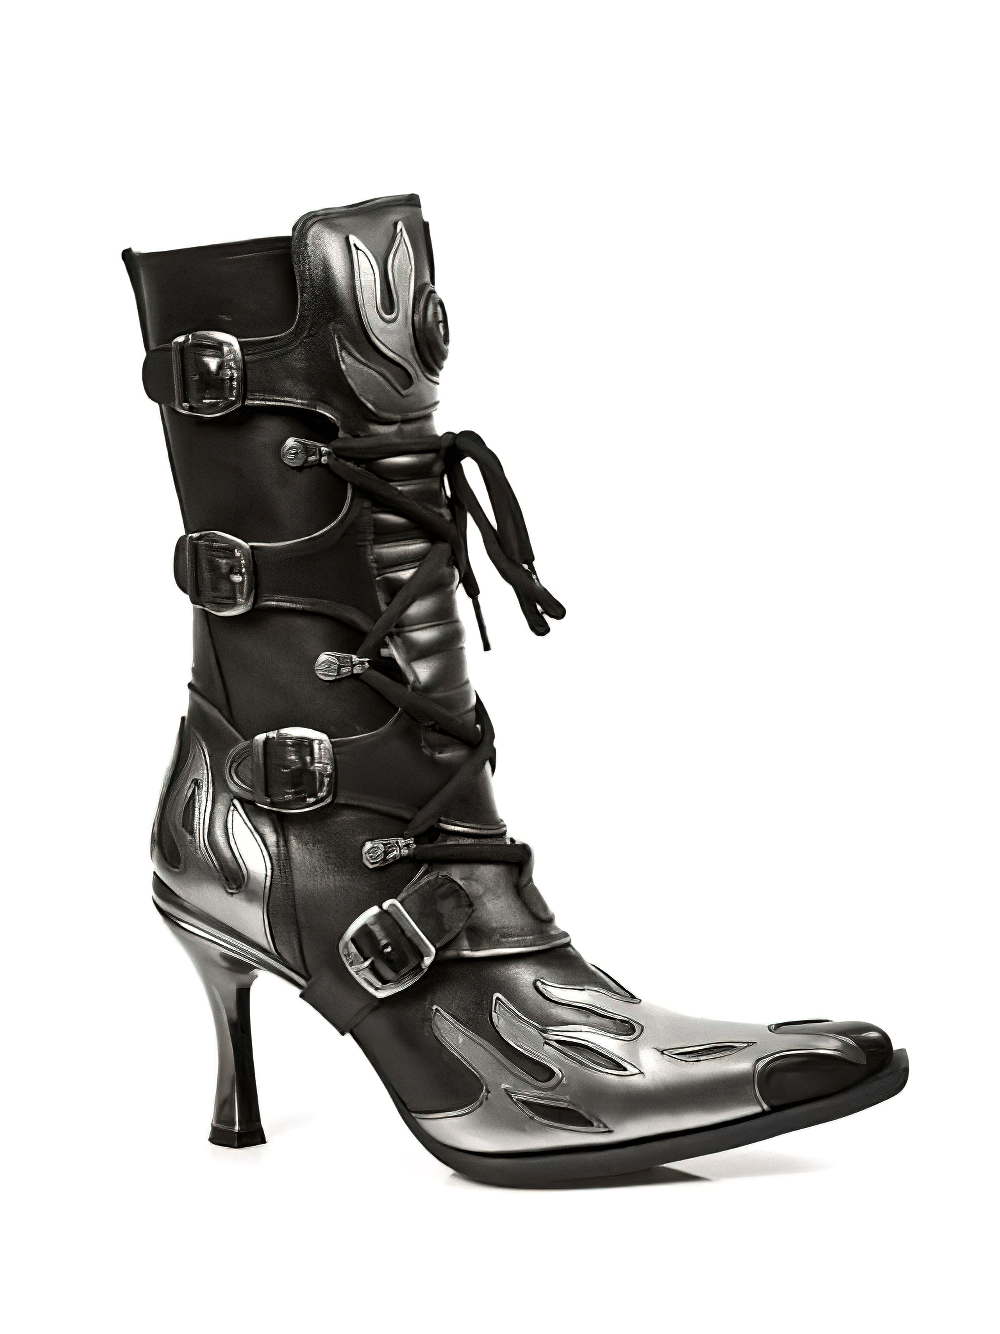 NEW ROCK Edgy Black Buckled Boots with Metallic Heels